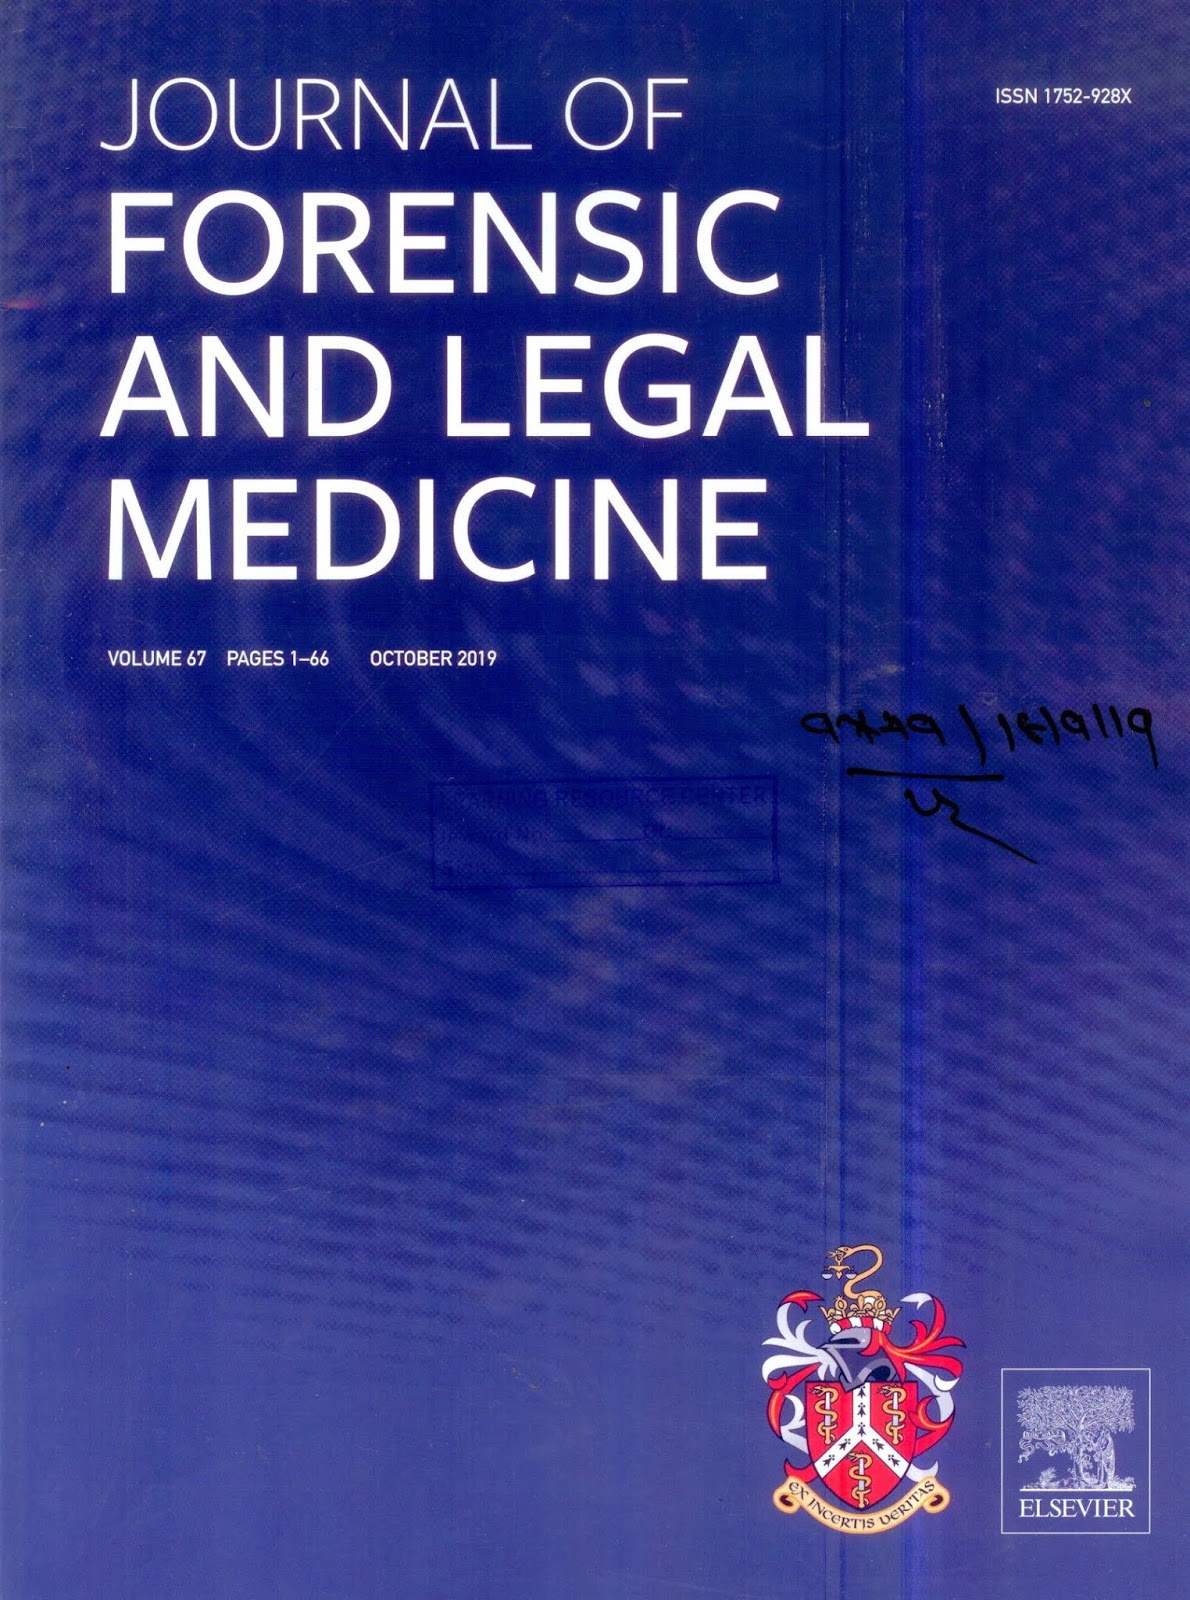 https://www.sciencedirect.com/journal/journal-of-forensic-and-legal-medicine/vol/67/suppl/C